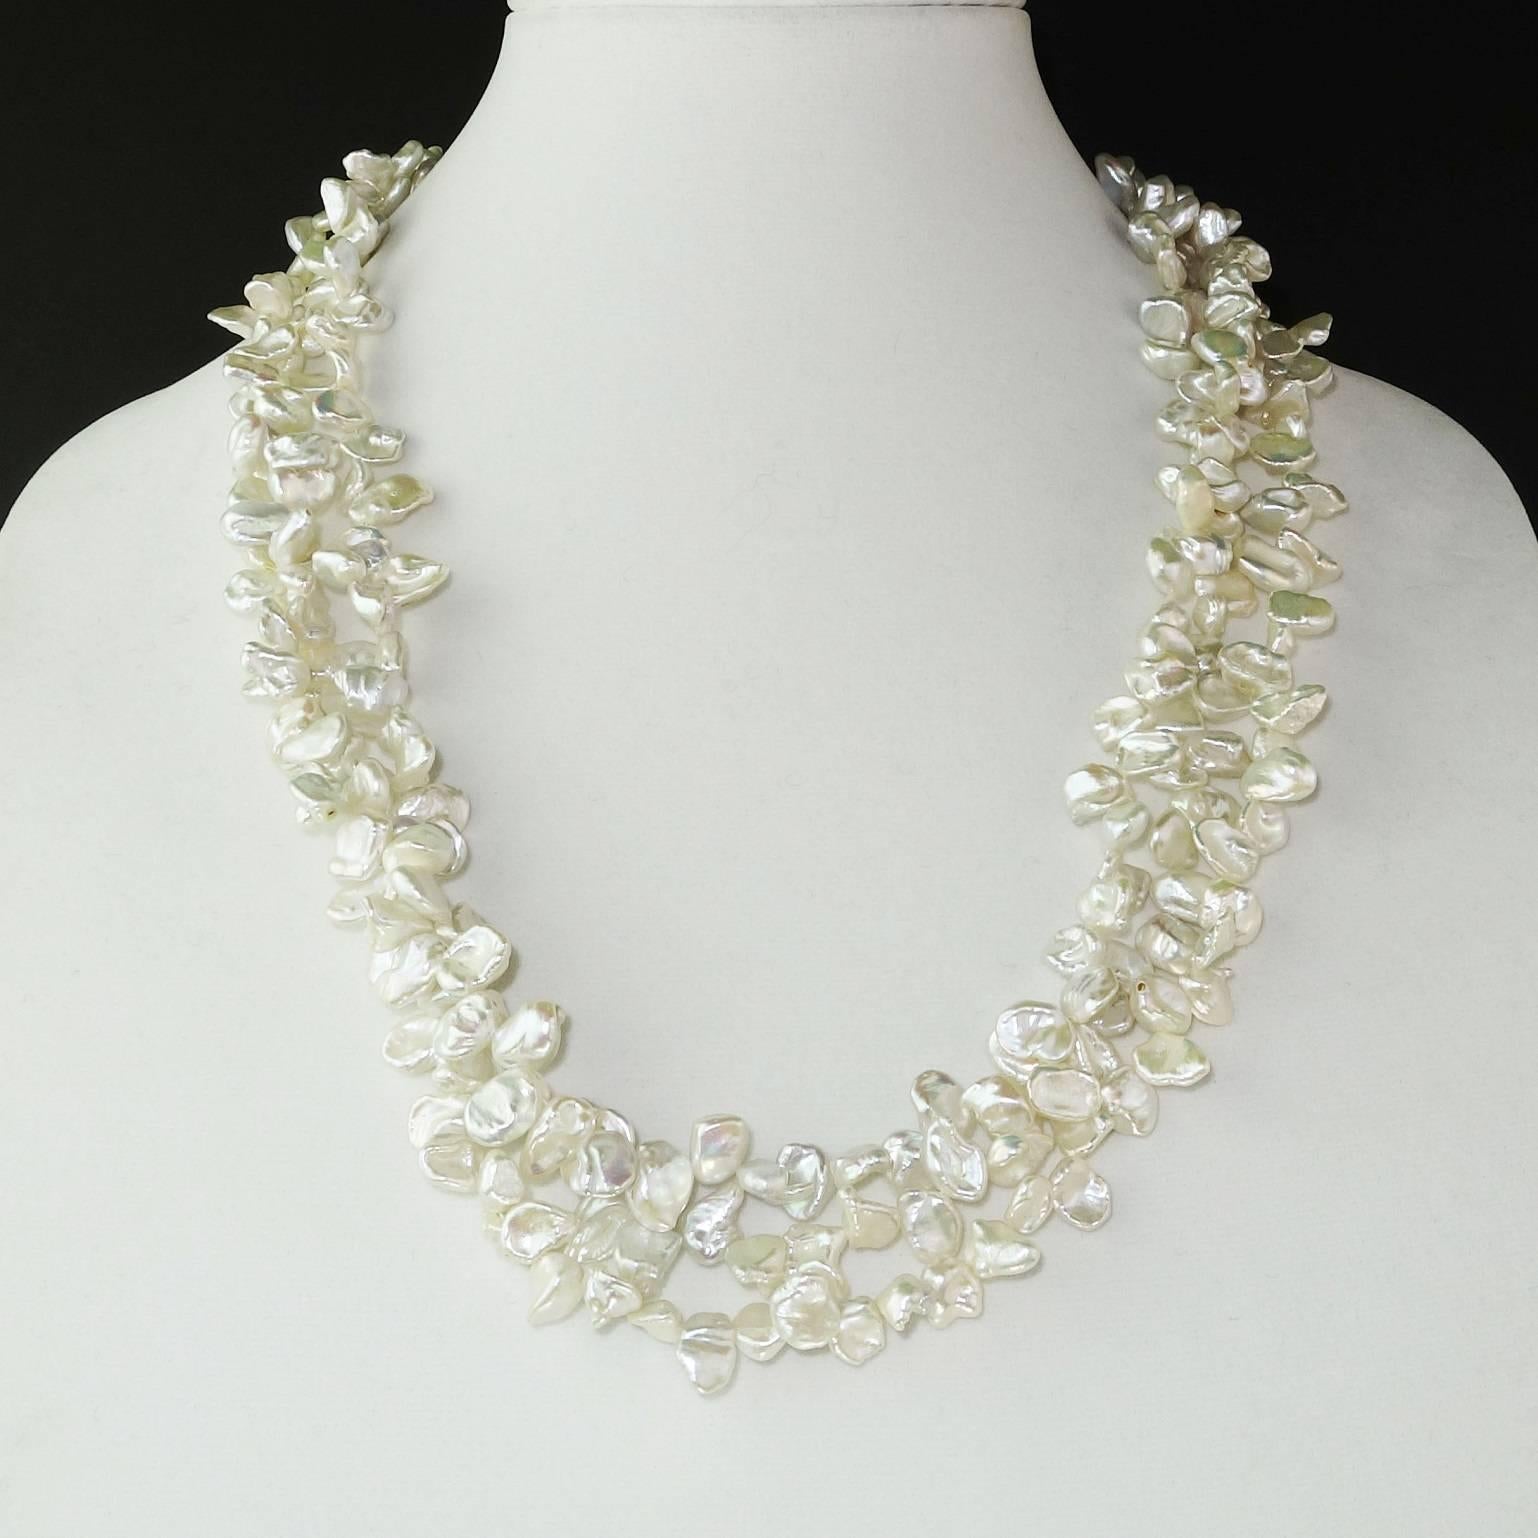 Triple Strand of Iridescent White Biwa Pearl Necklace with Sterling Silver Clasp 1